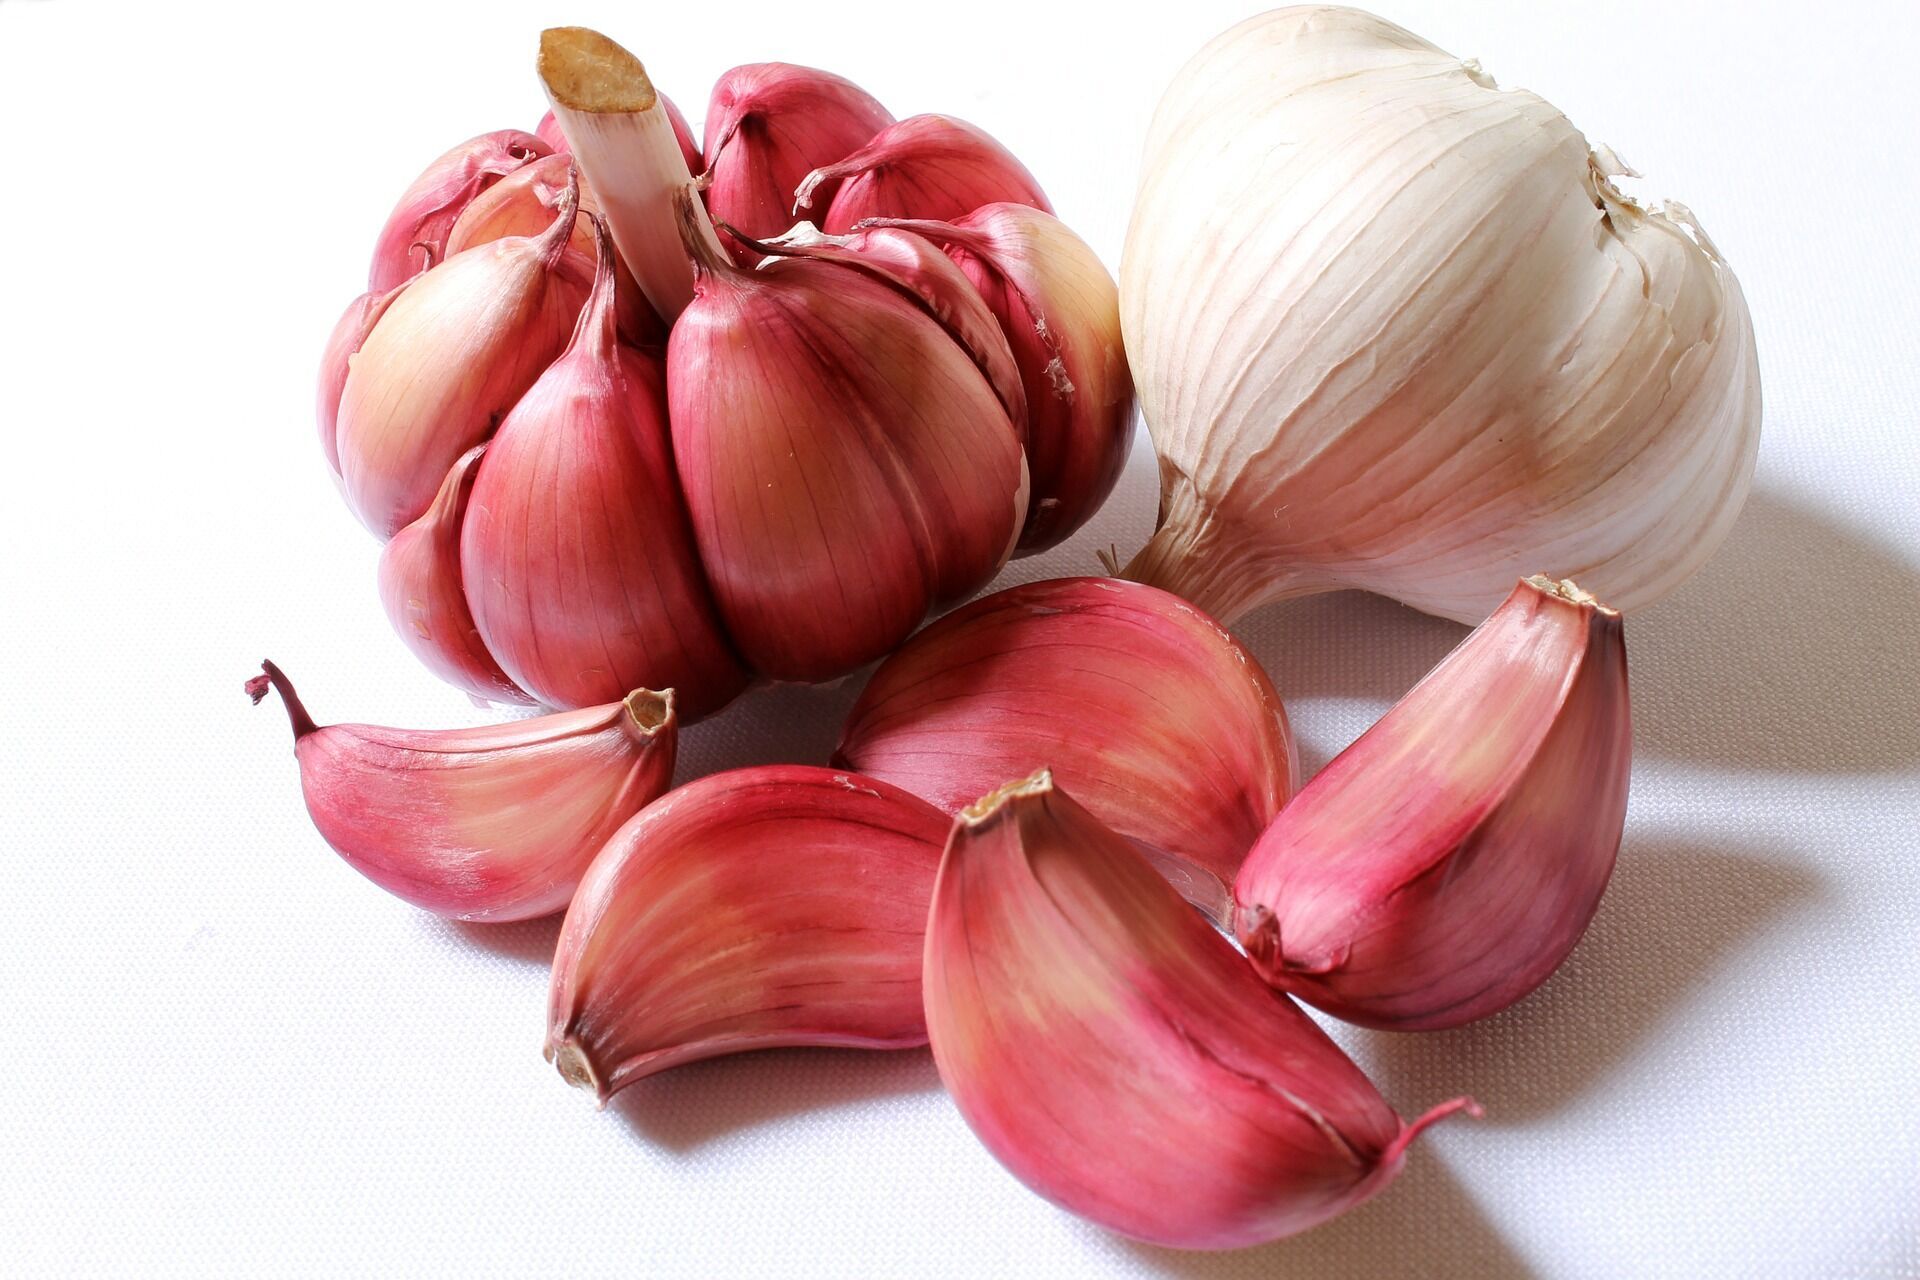 Garlic for dishes